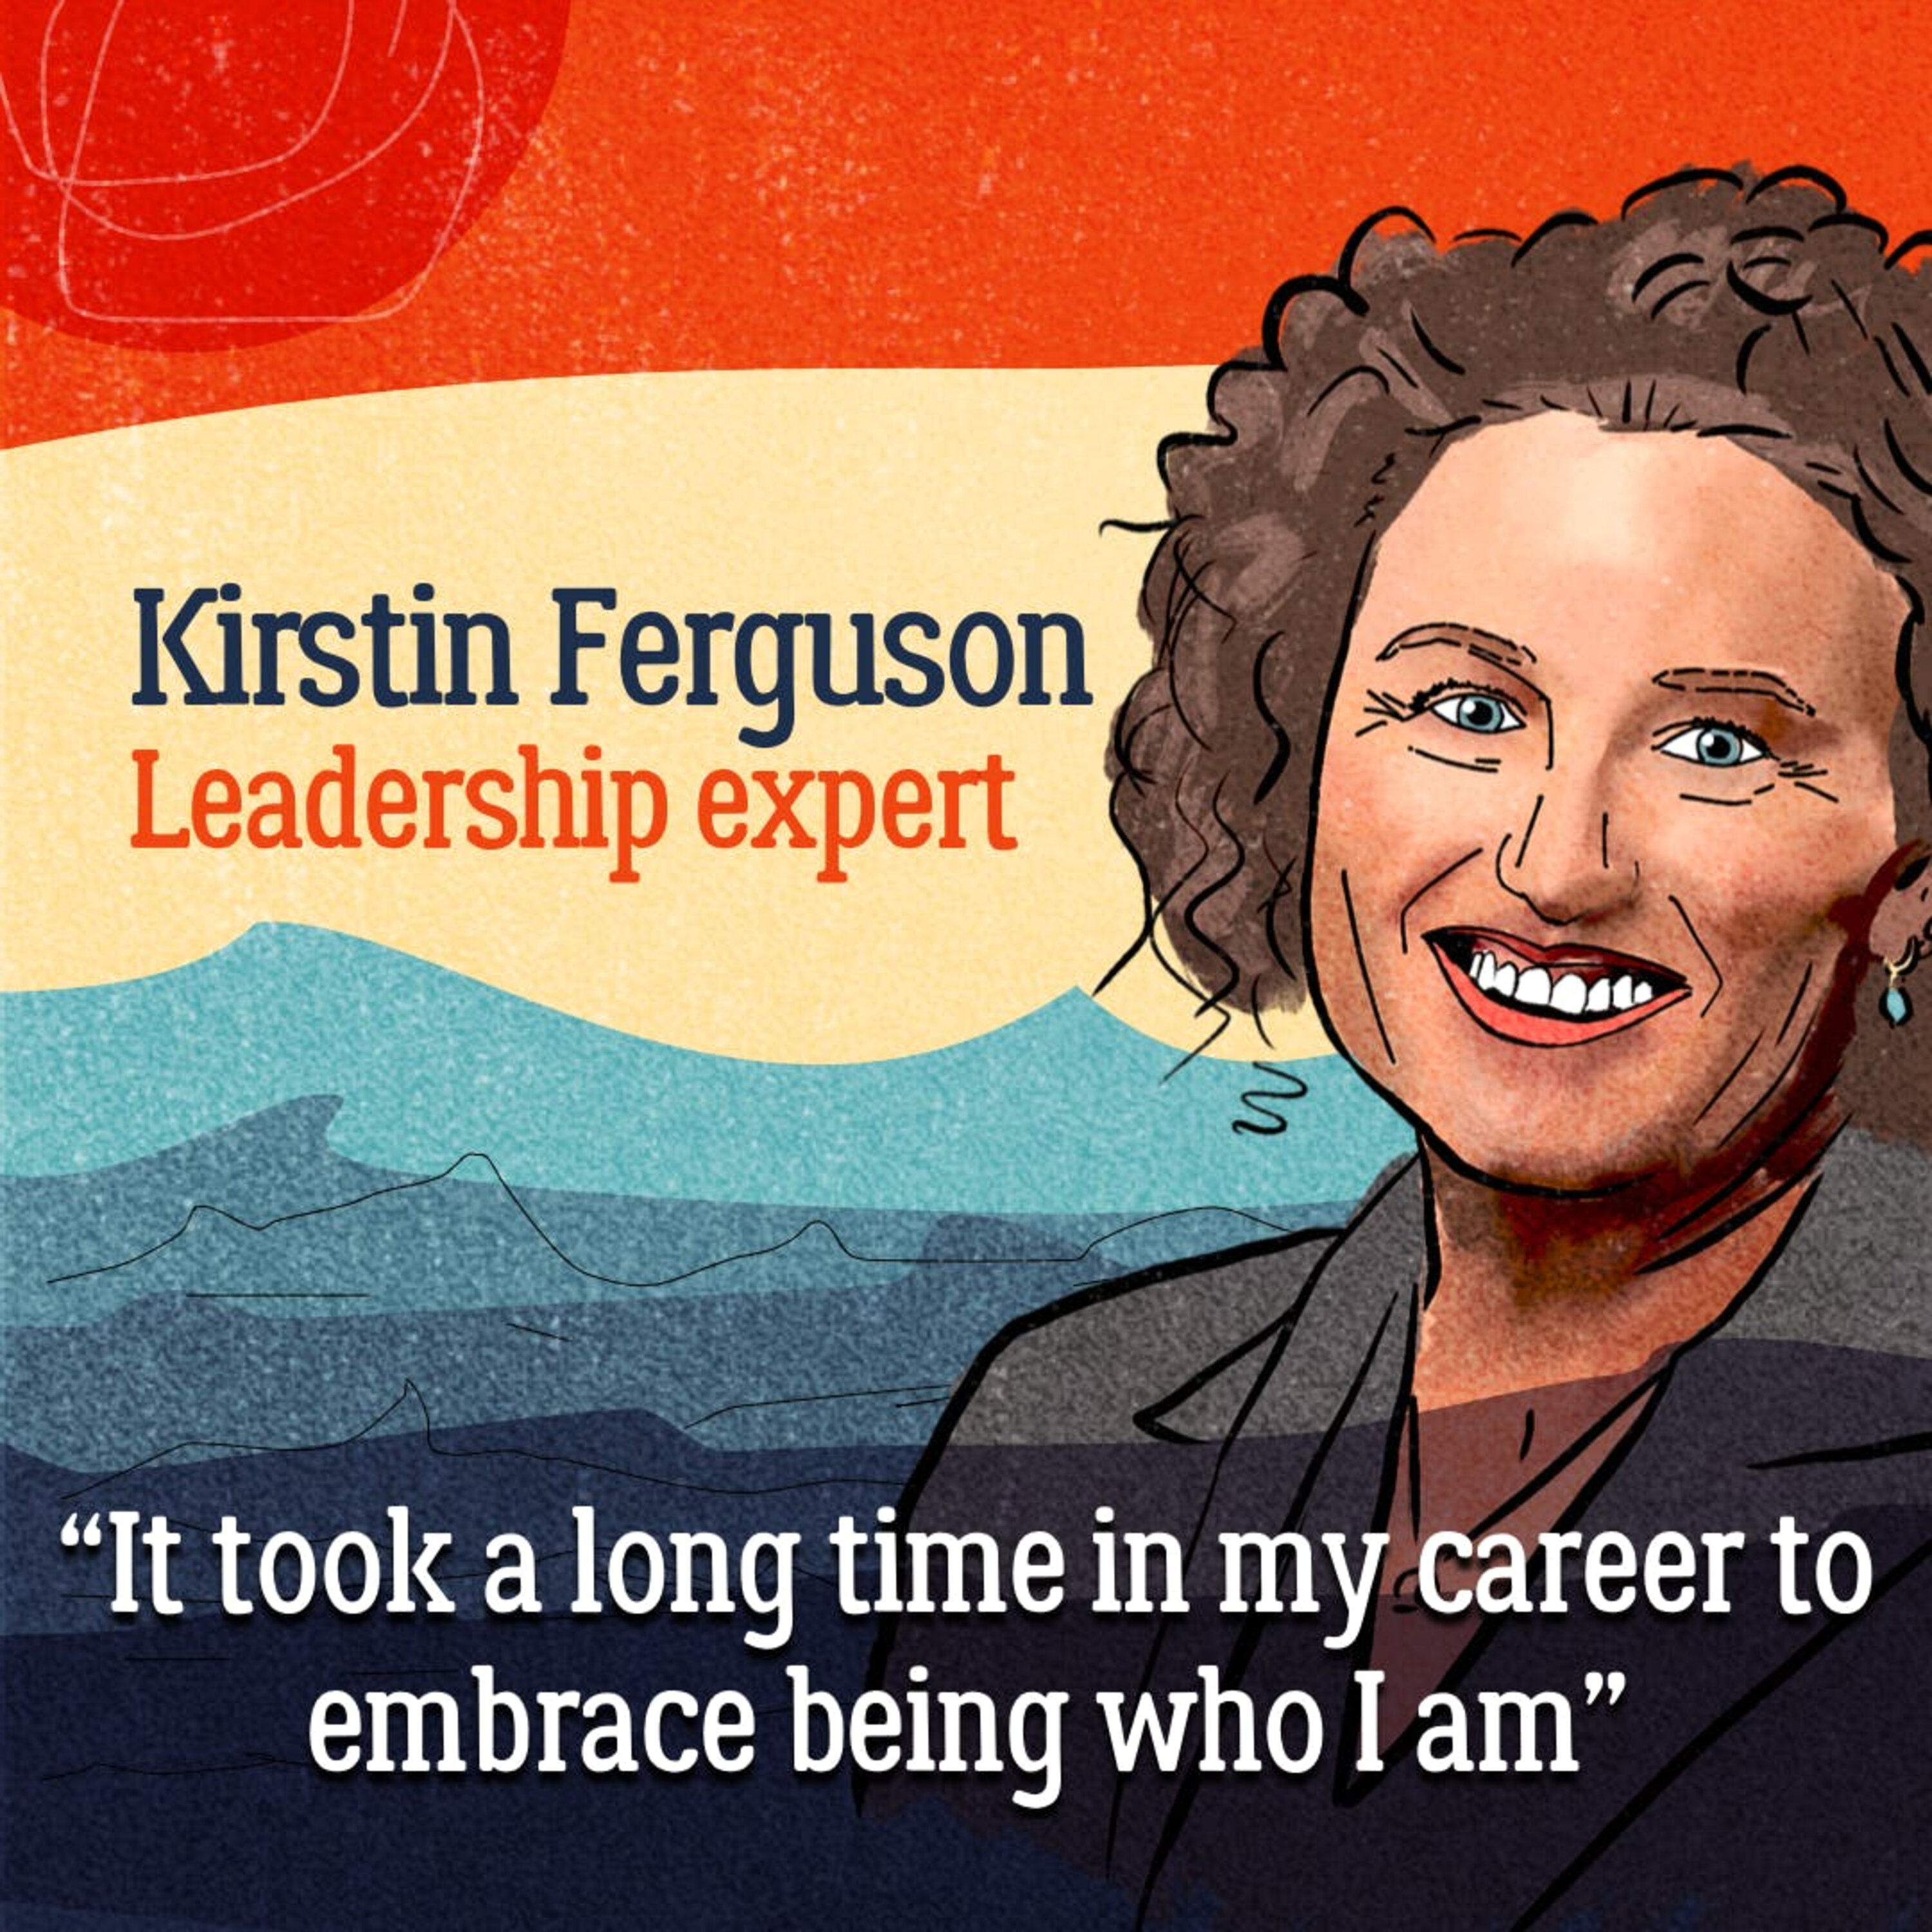 Military might - Kirstin Ferguson's long march to equality in leadership